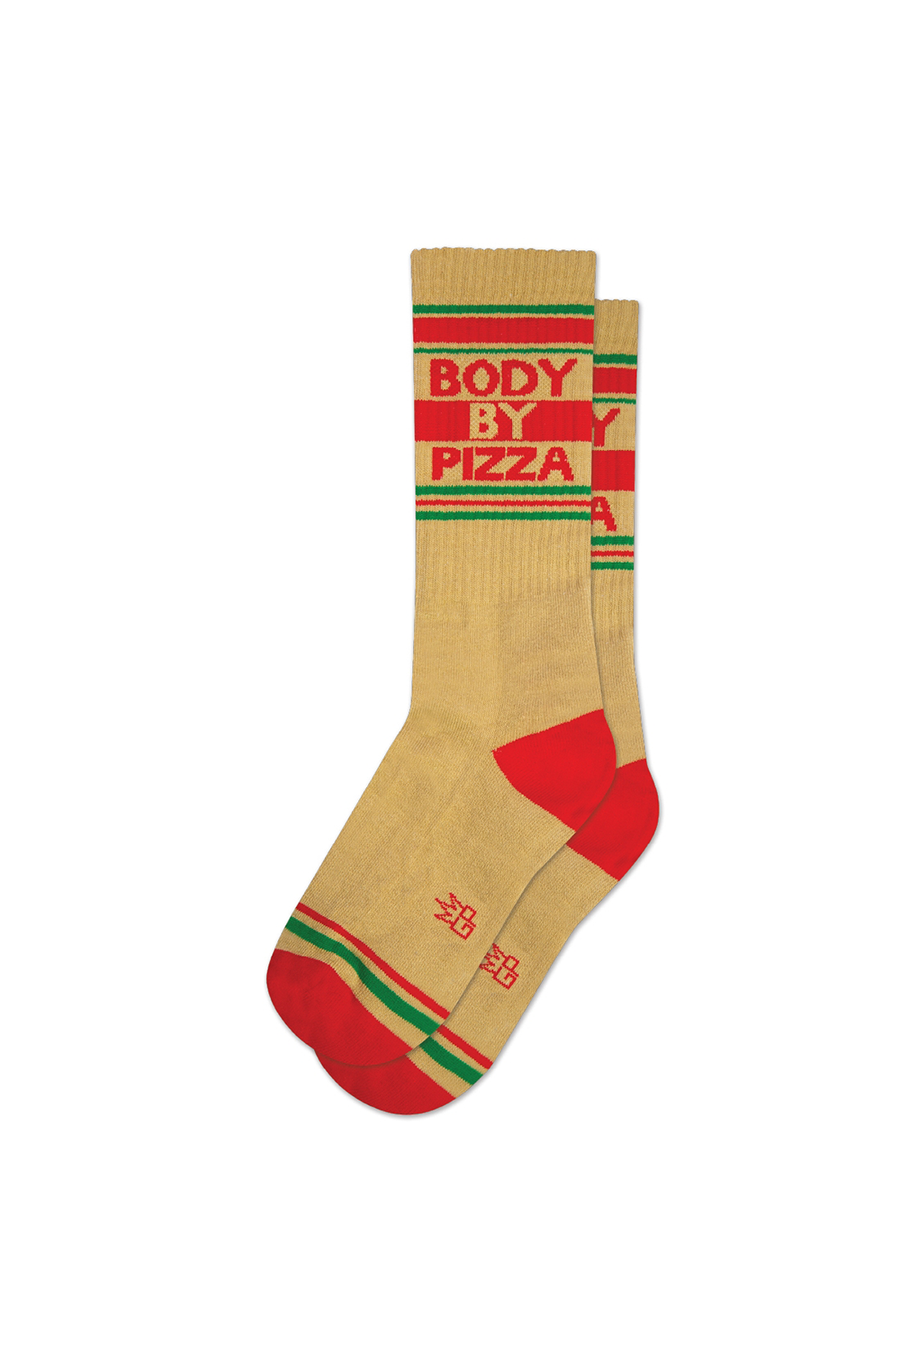 Body By Pizza Ribbed Gym Sock - Main Image Number 1 of 1